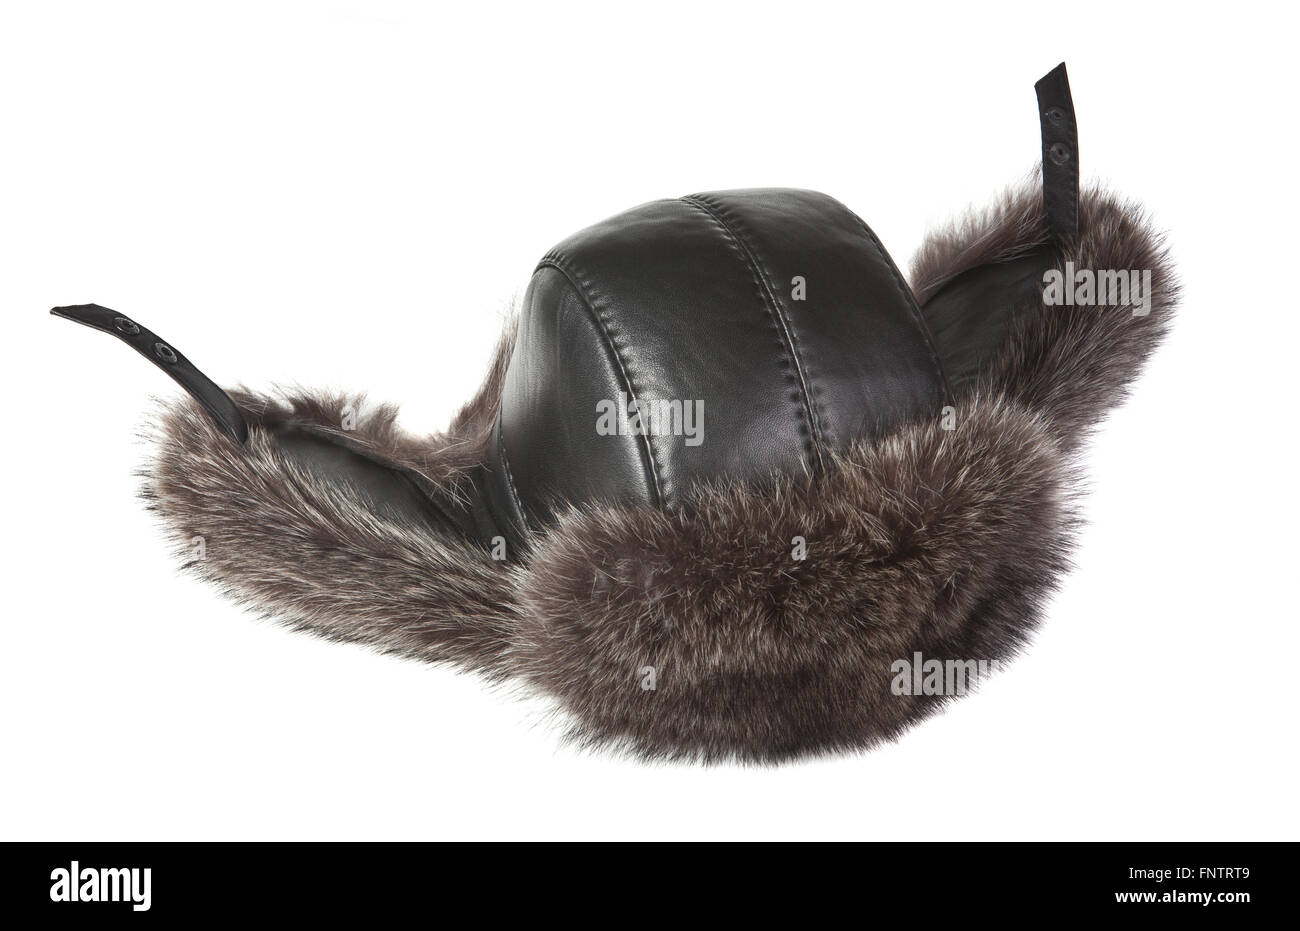 Men's fur hat with ears on a white background Stock Photo